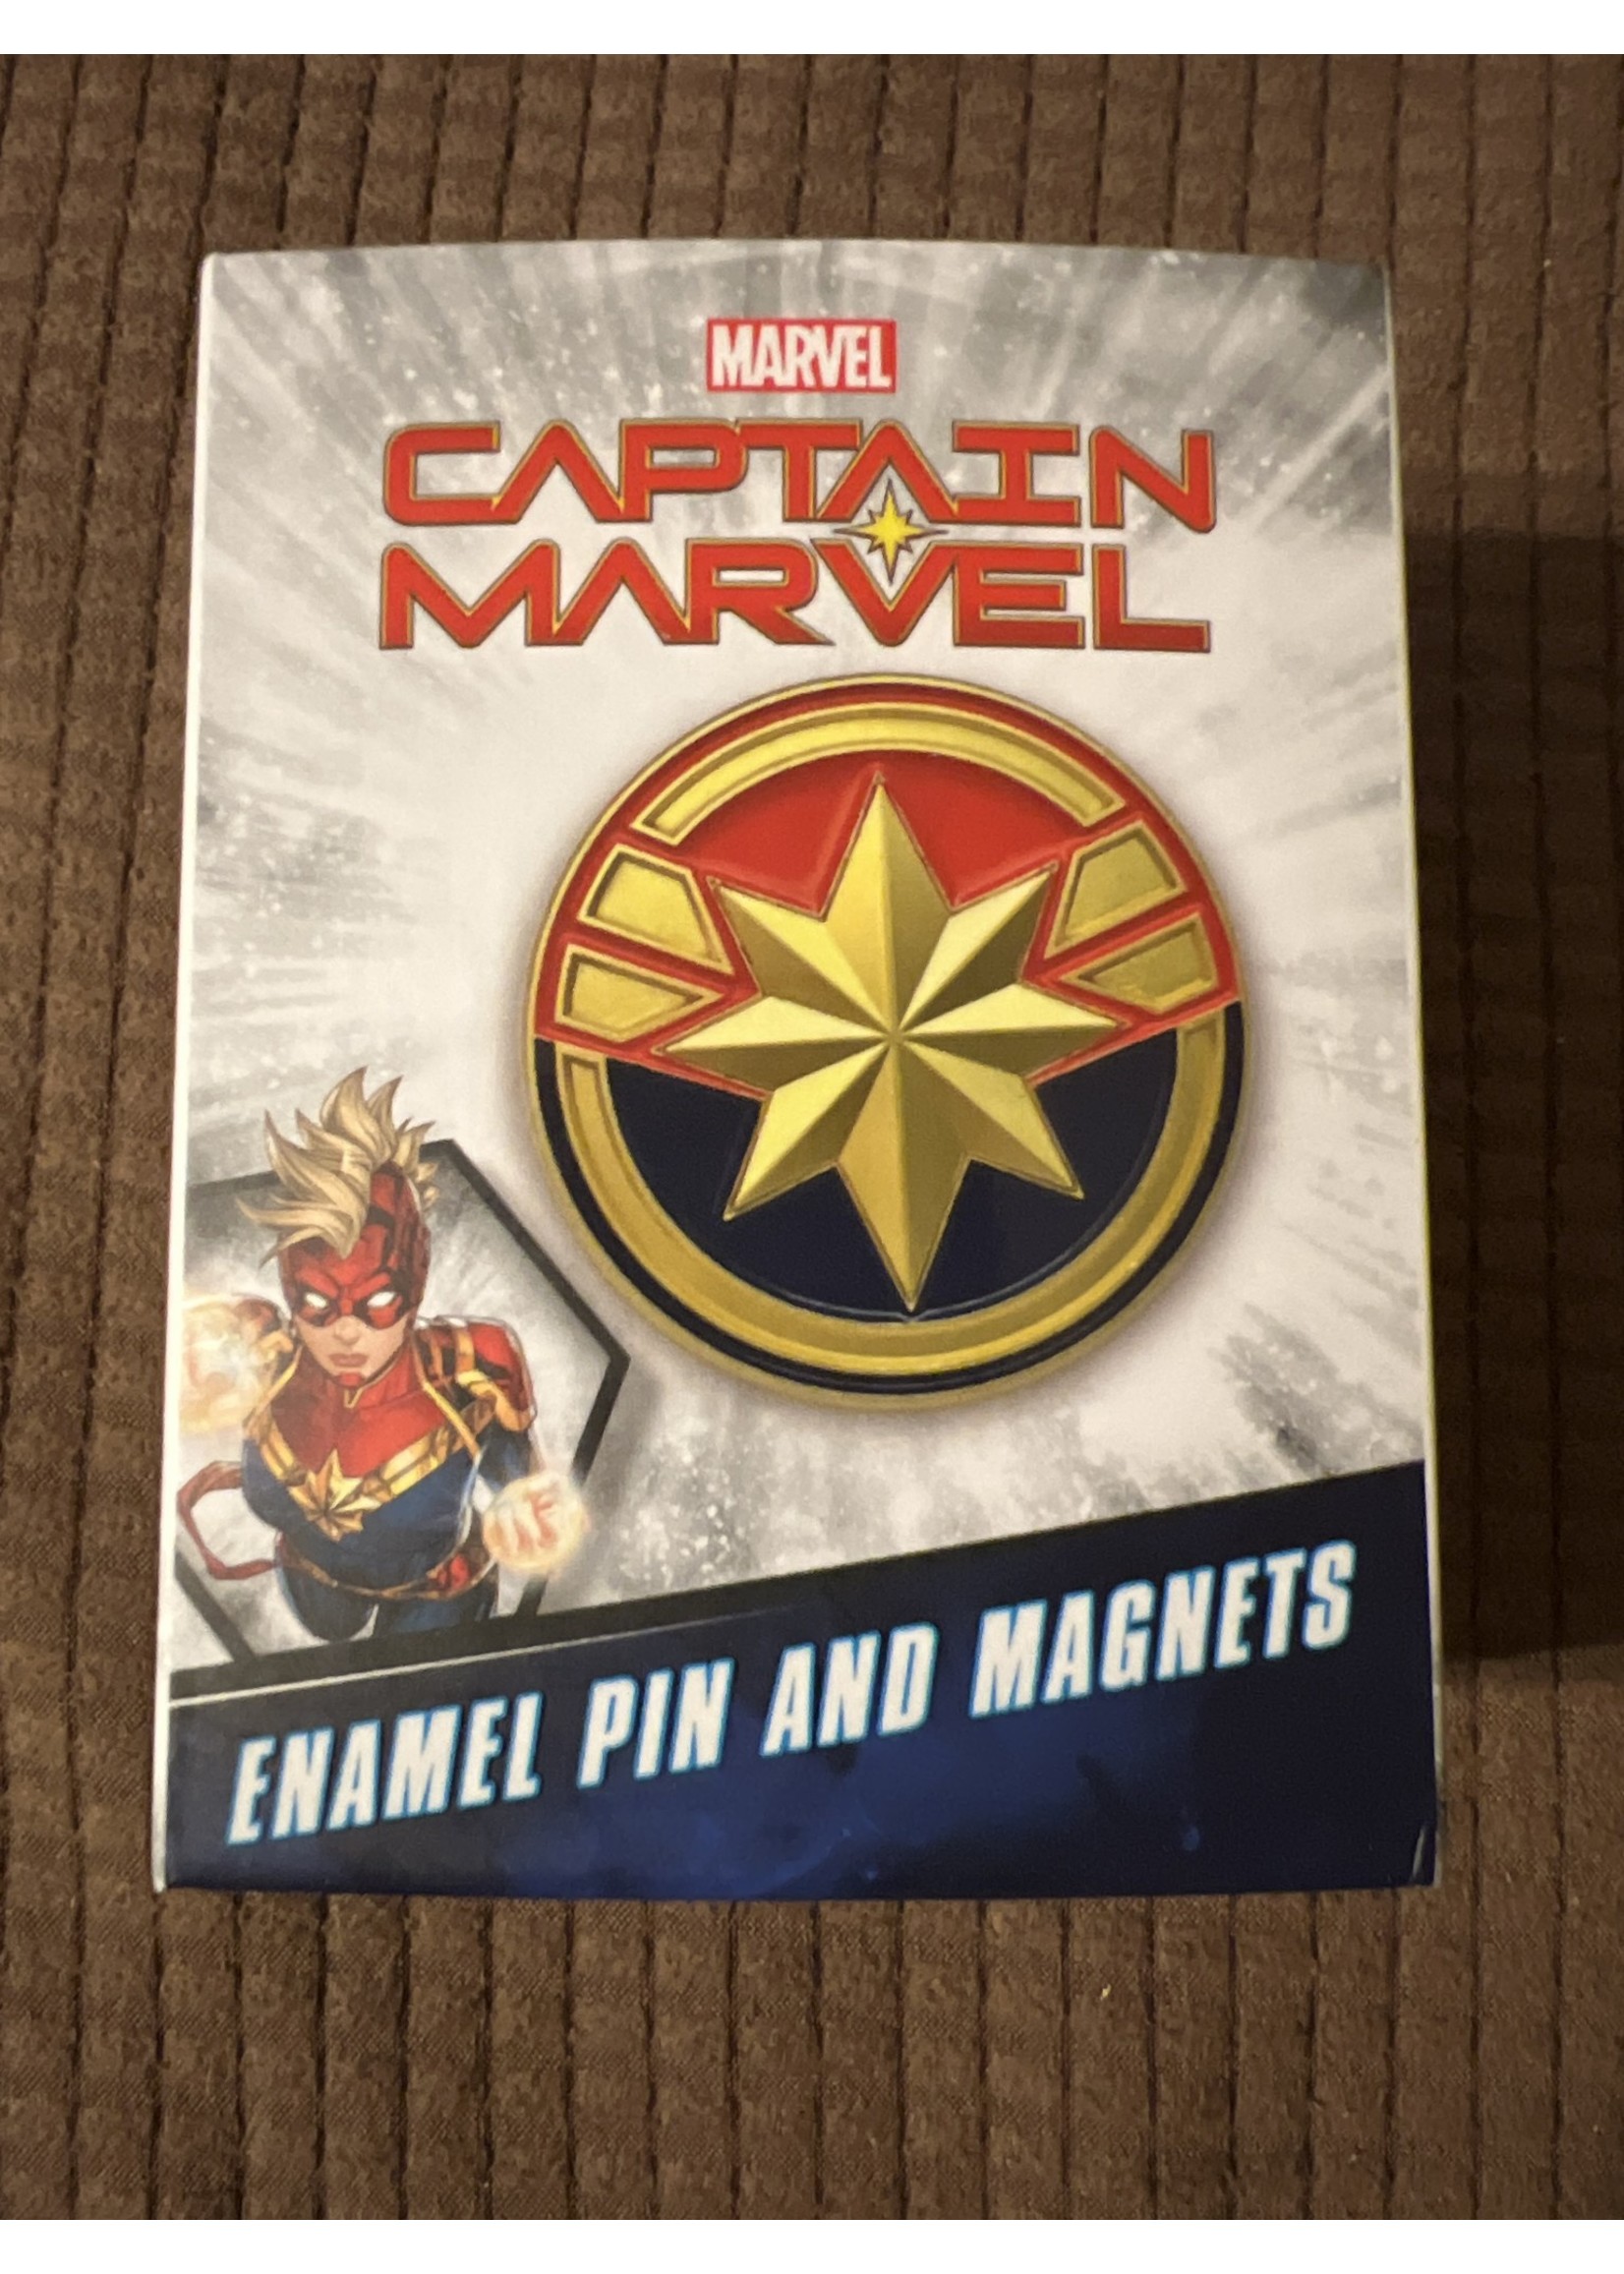 Captain Marvel Enamel Pin and Magnets